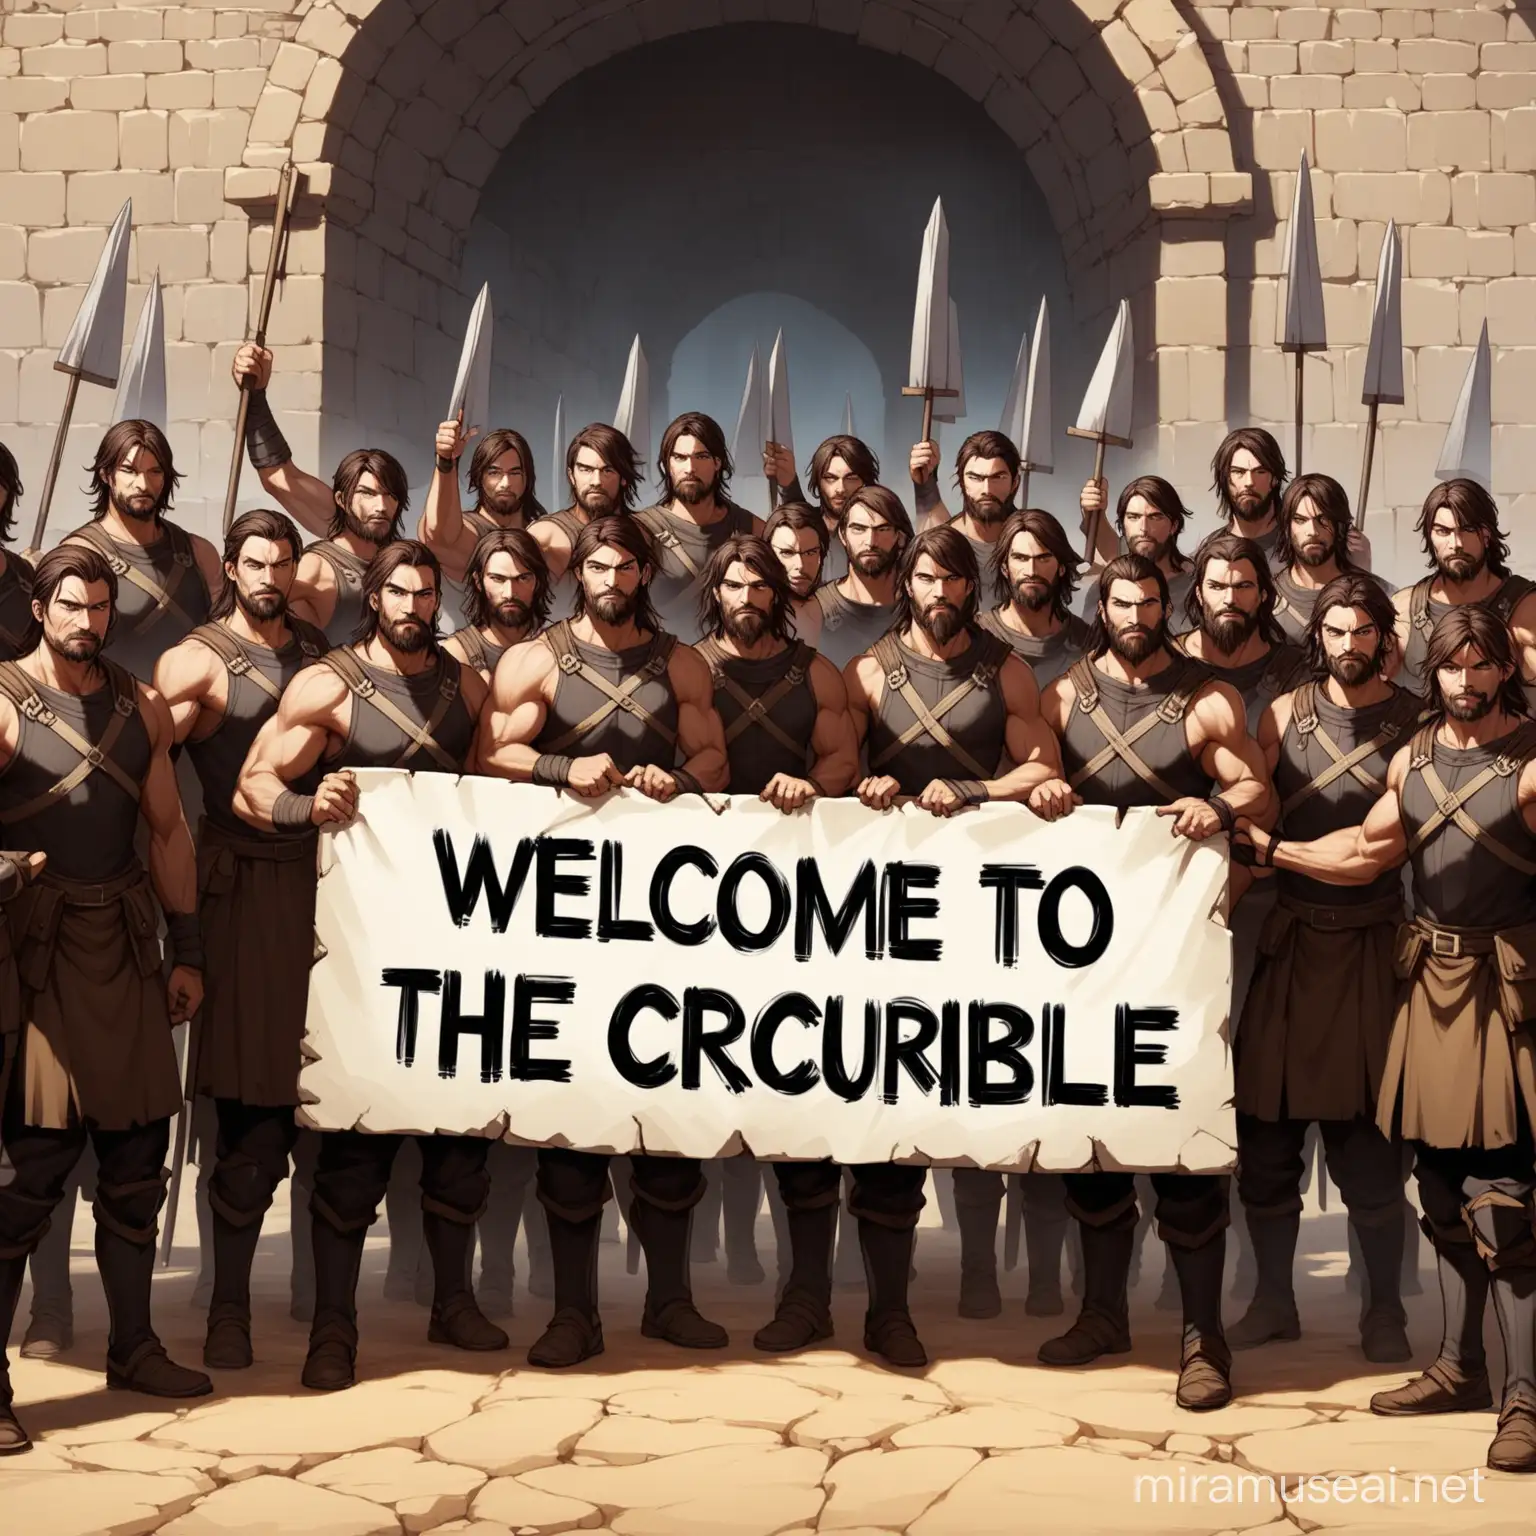 a group of warrior men holding up a sign that says "Welcome to the Crucible!"